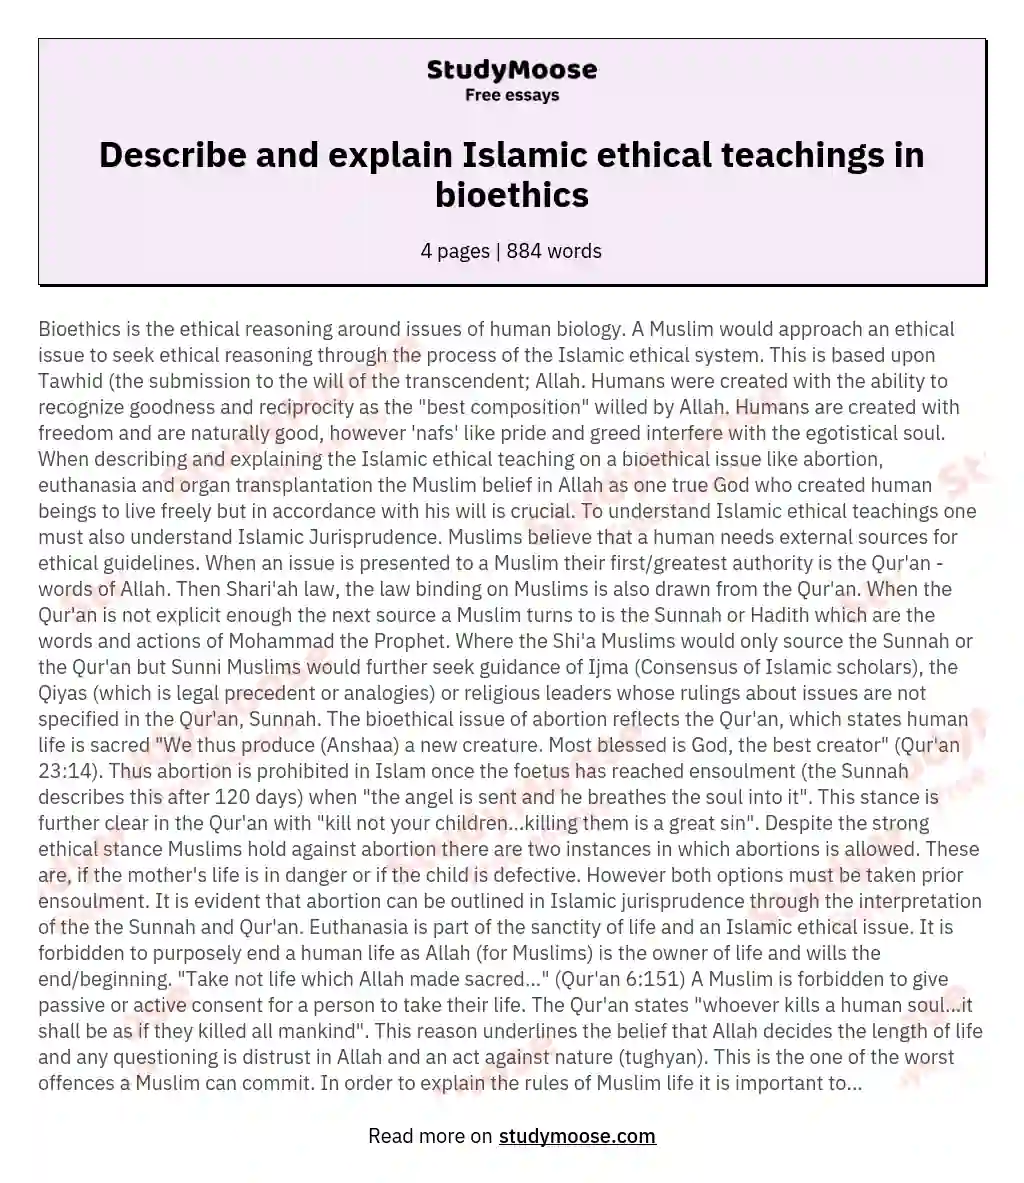 Describe and explain Islamic ethical teachings in bioethics